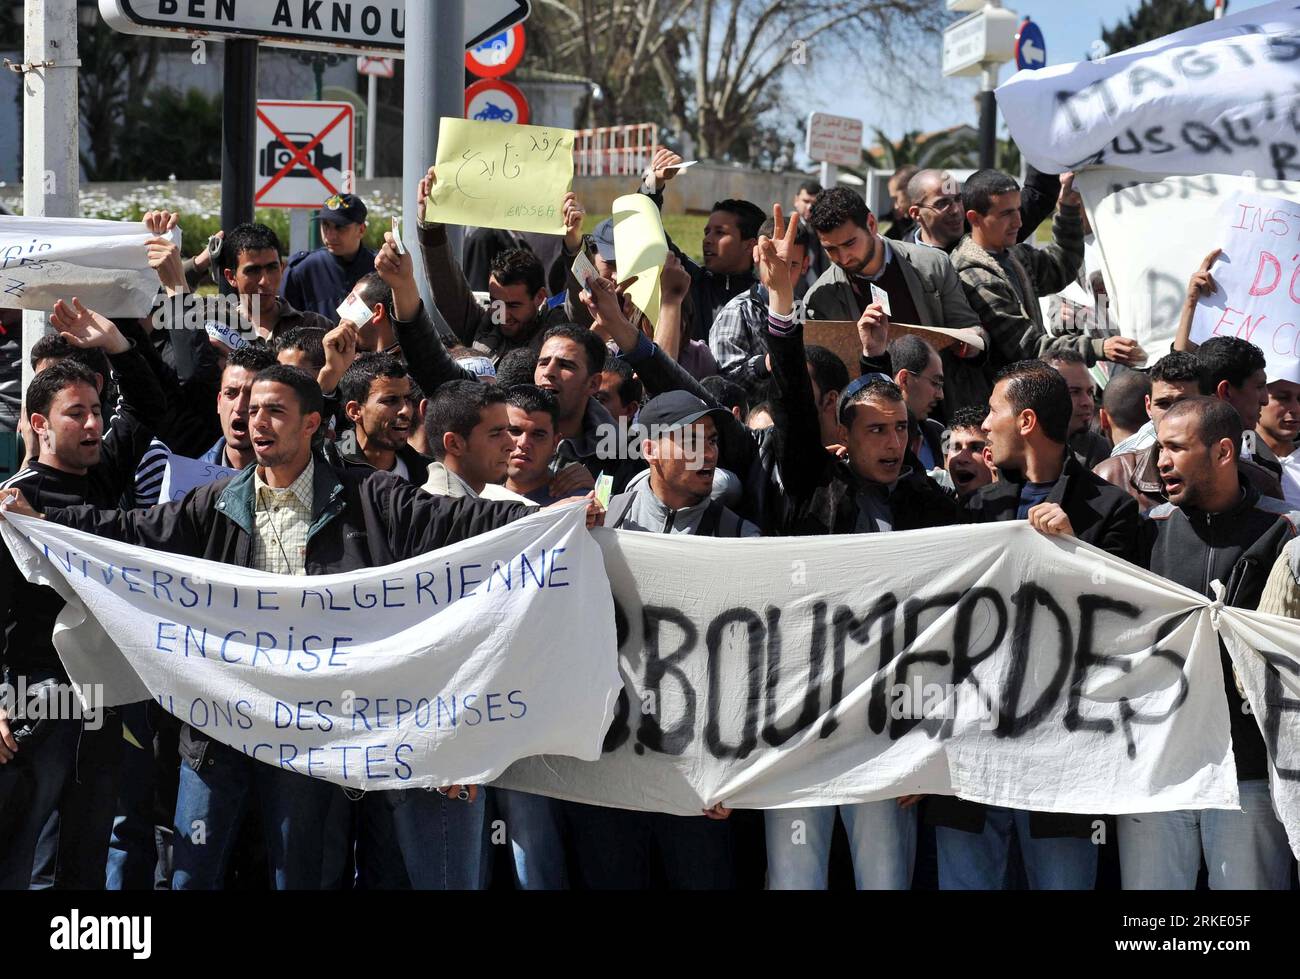 Bildnummer: 55024186  Datum: 14.03.2011  Copyright: imago/Xinhua (110314) -- ALGIERS, March 14, 2011 (Xinhua) -- Algerian students from universities take part in a protest in front of the Presidential offices to call for reform of the Algerian universities in Algiers, Algeria, March 14, 2011. (Xinhua/Mohamed Kadri) (jl) ALGERIA-ALGIERS-STUDENTS-PROTEST PUBLICATIONxNOTxINxCHN Gesellschaft Demo Protest Studenten Studenten Demo Studentenprotest kbdig xdp premiumd 2011 quer  o0 Reformen, Bildungsreform    Bildnummer 55024186 Date 14 03 2011 Copyright Imago XINHUA  Algiers March 14 2011 XINHUA Alge Stock Photo